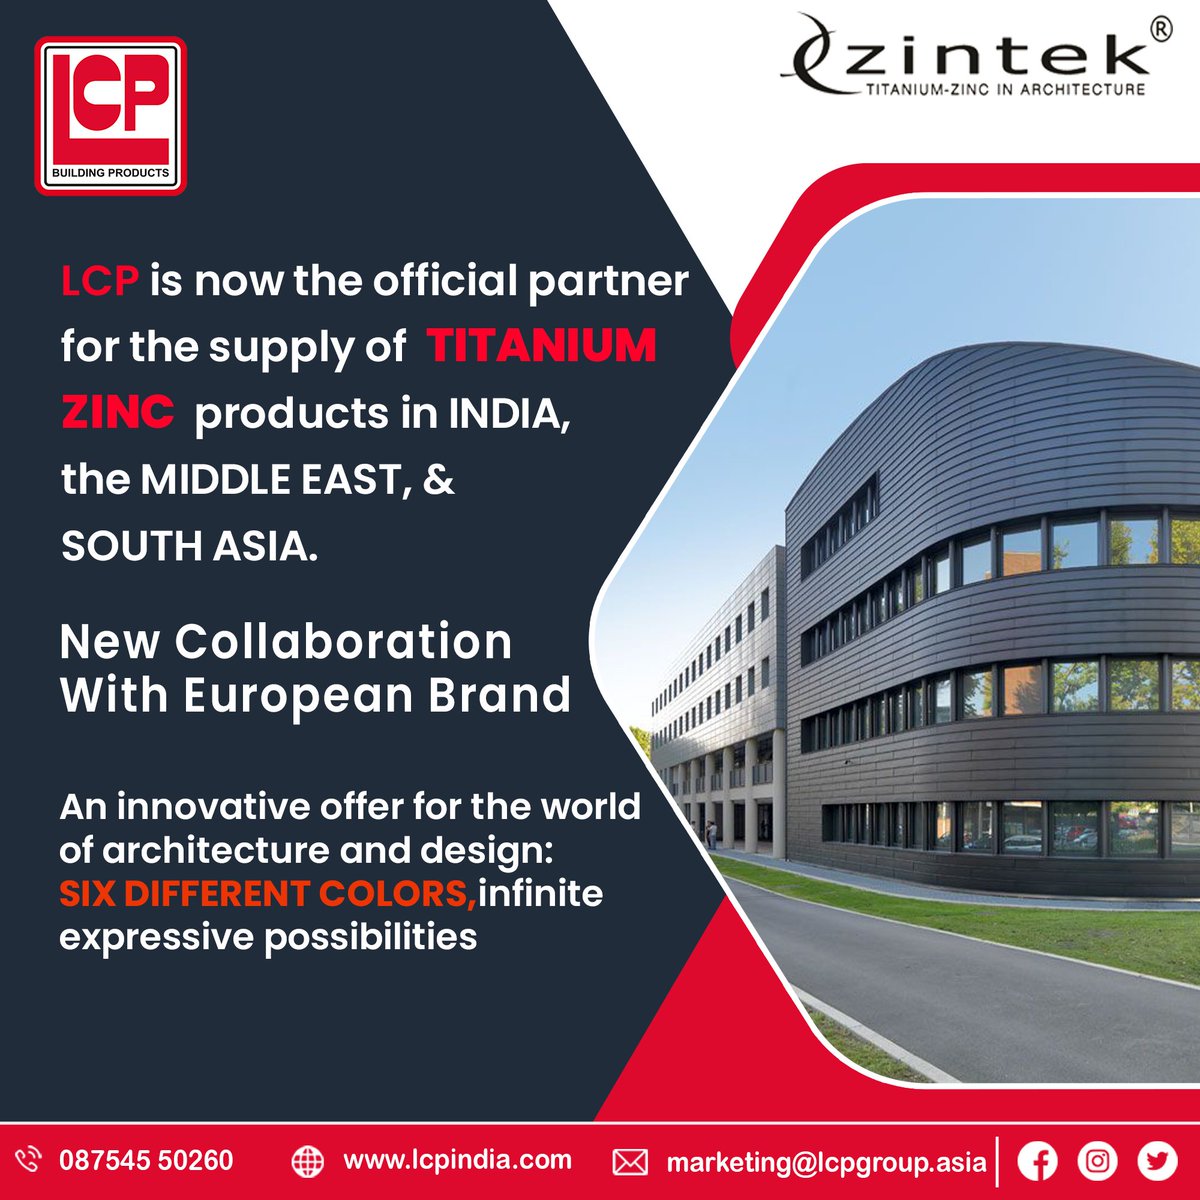 Zintek® is an Italian company specializing in the production and marketing of rolled zinc-titanium products for architectural purposes. LCP has become the official partner for the distribution of titanium zinc products in India, the Middle East, and South Asia.
#Zintek #lcpindia